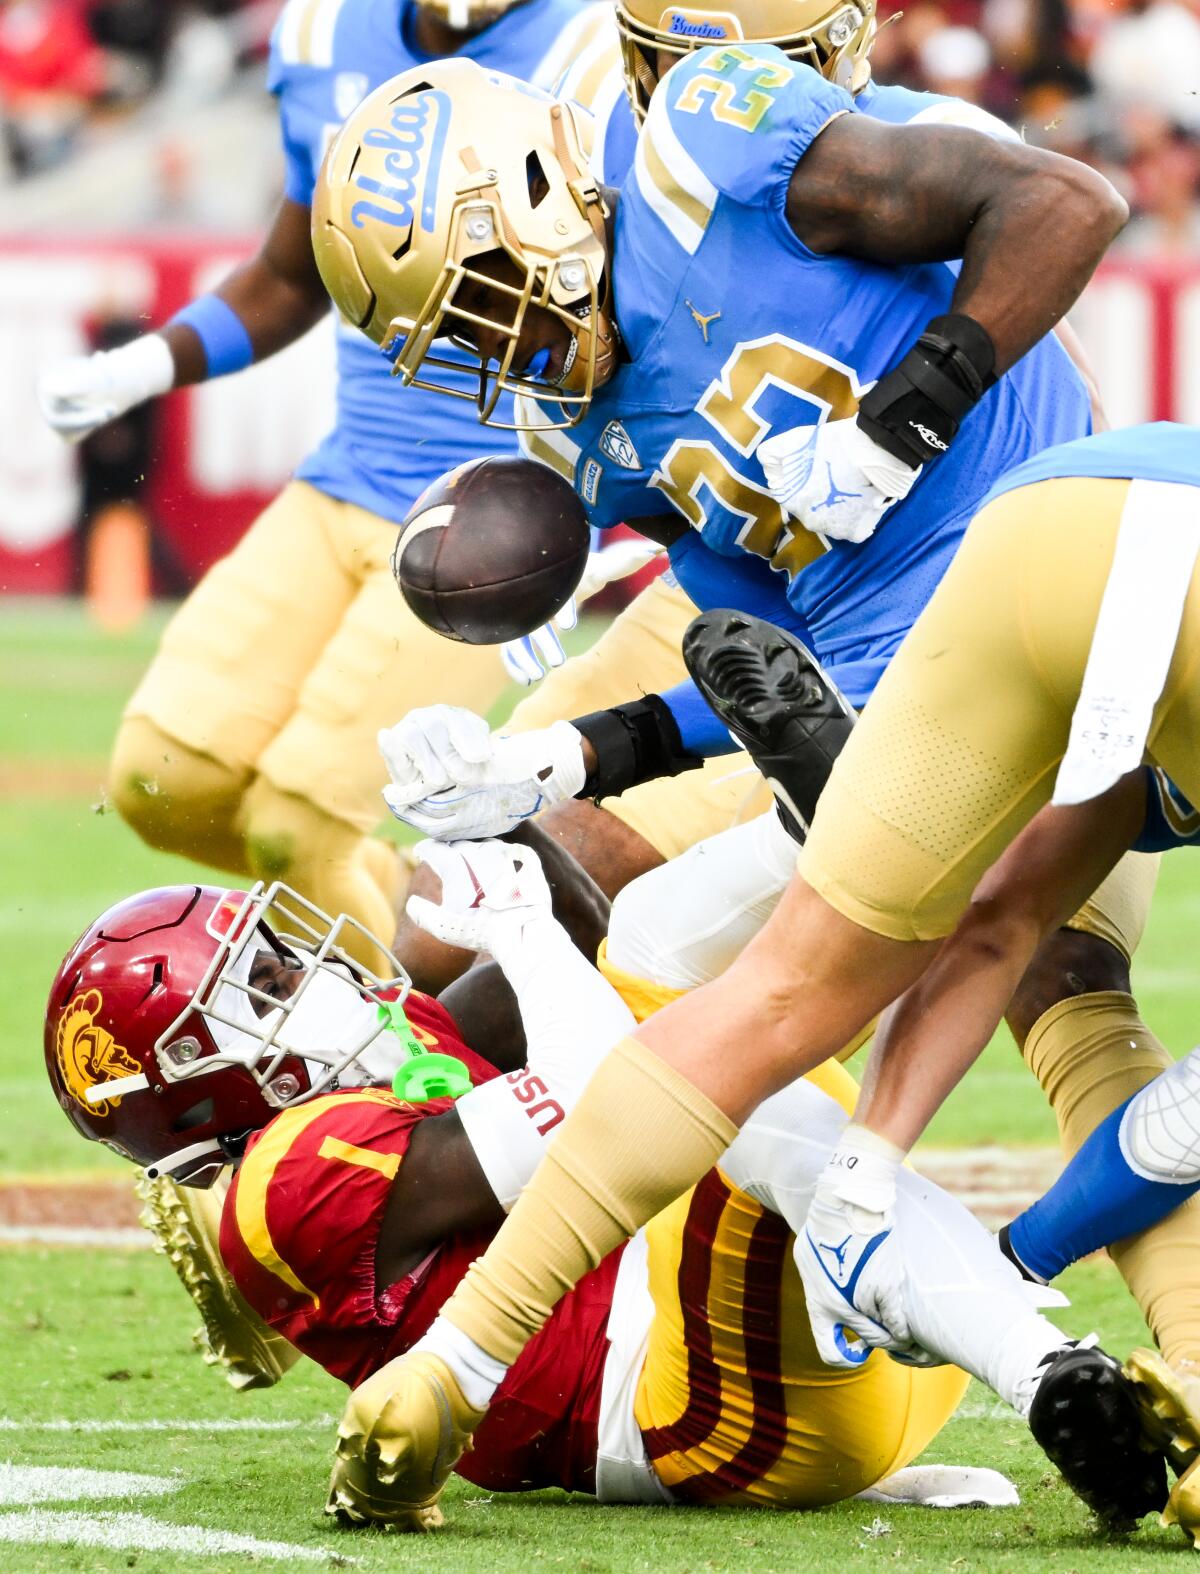 UCLA defensive back Kenny Churchwell III forces a fumble by USC wide receiver Zachariah Branch